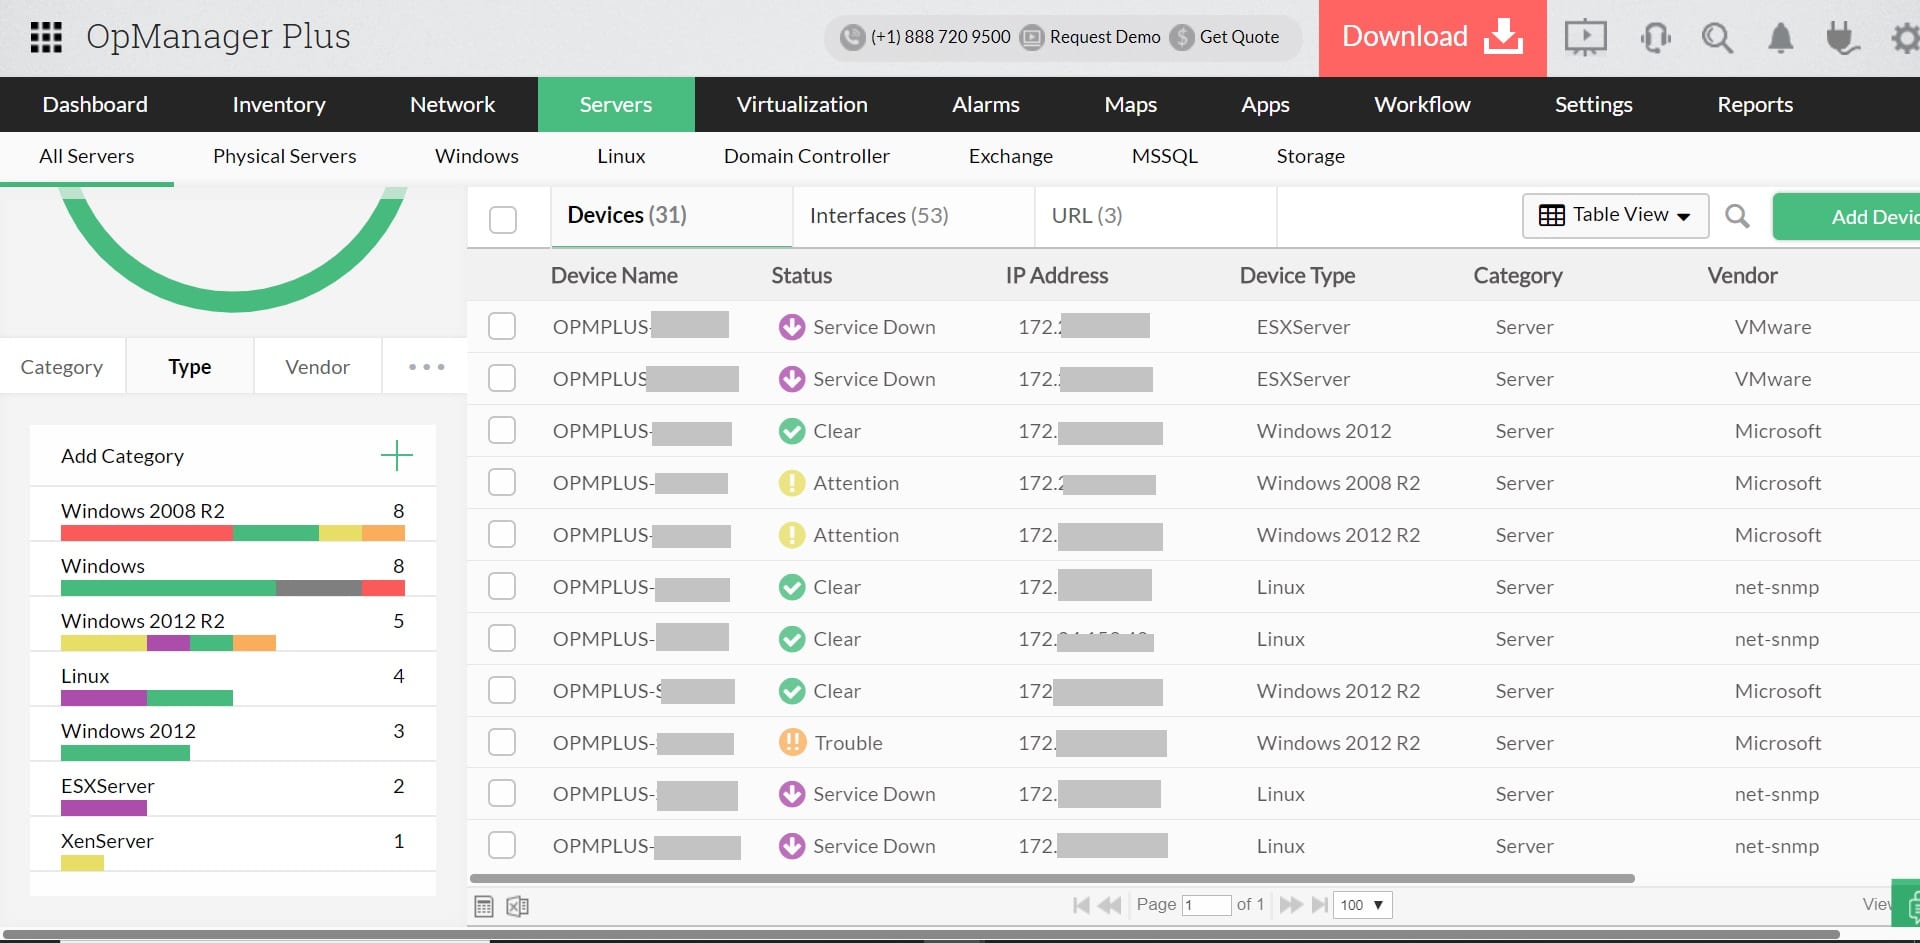 ManageEngine OpManager Plus dashboard